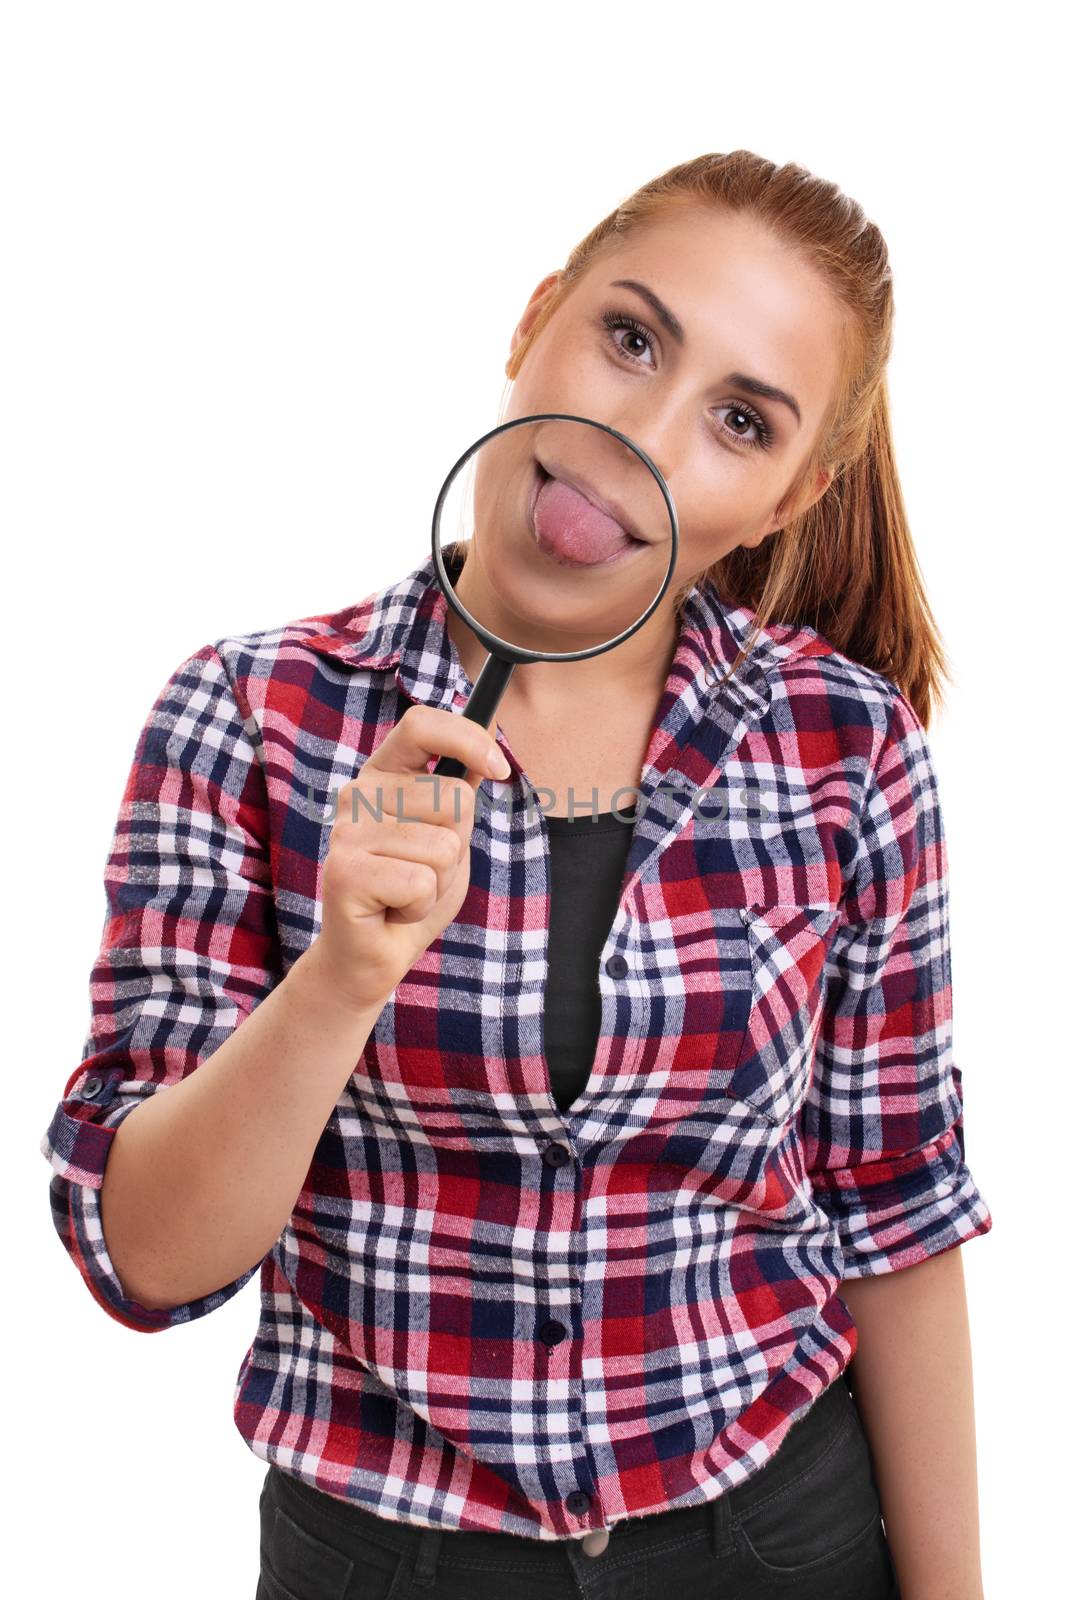 Young woman sticking her tongue out under magnifying glass by Mendelex